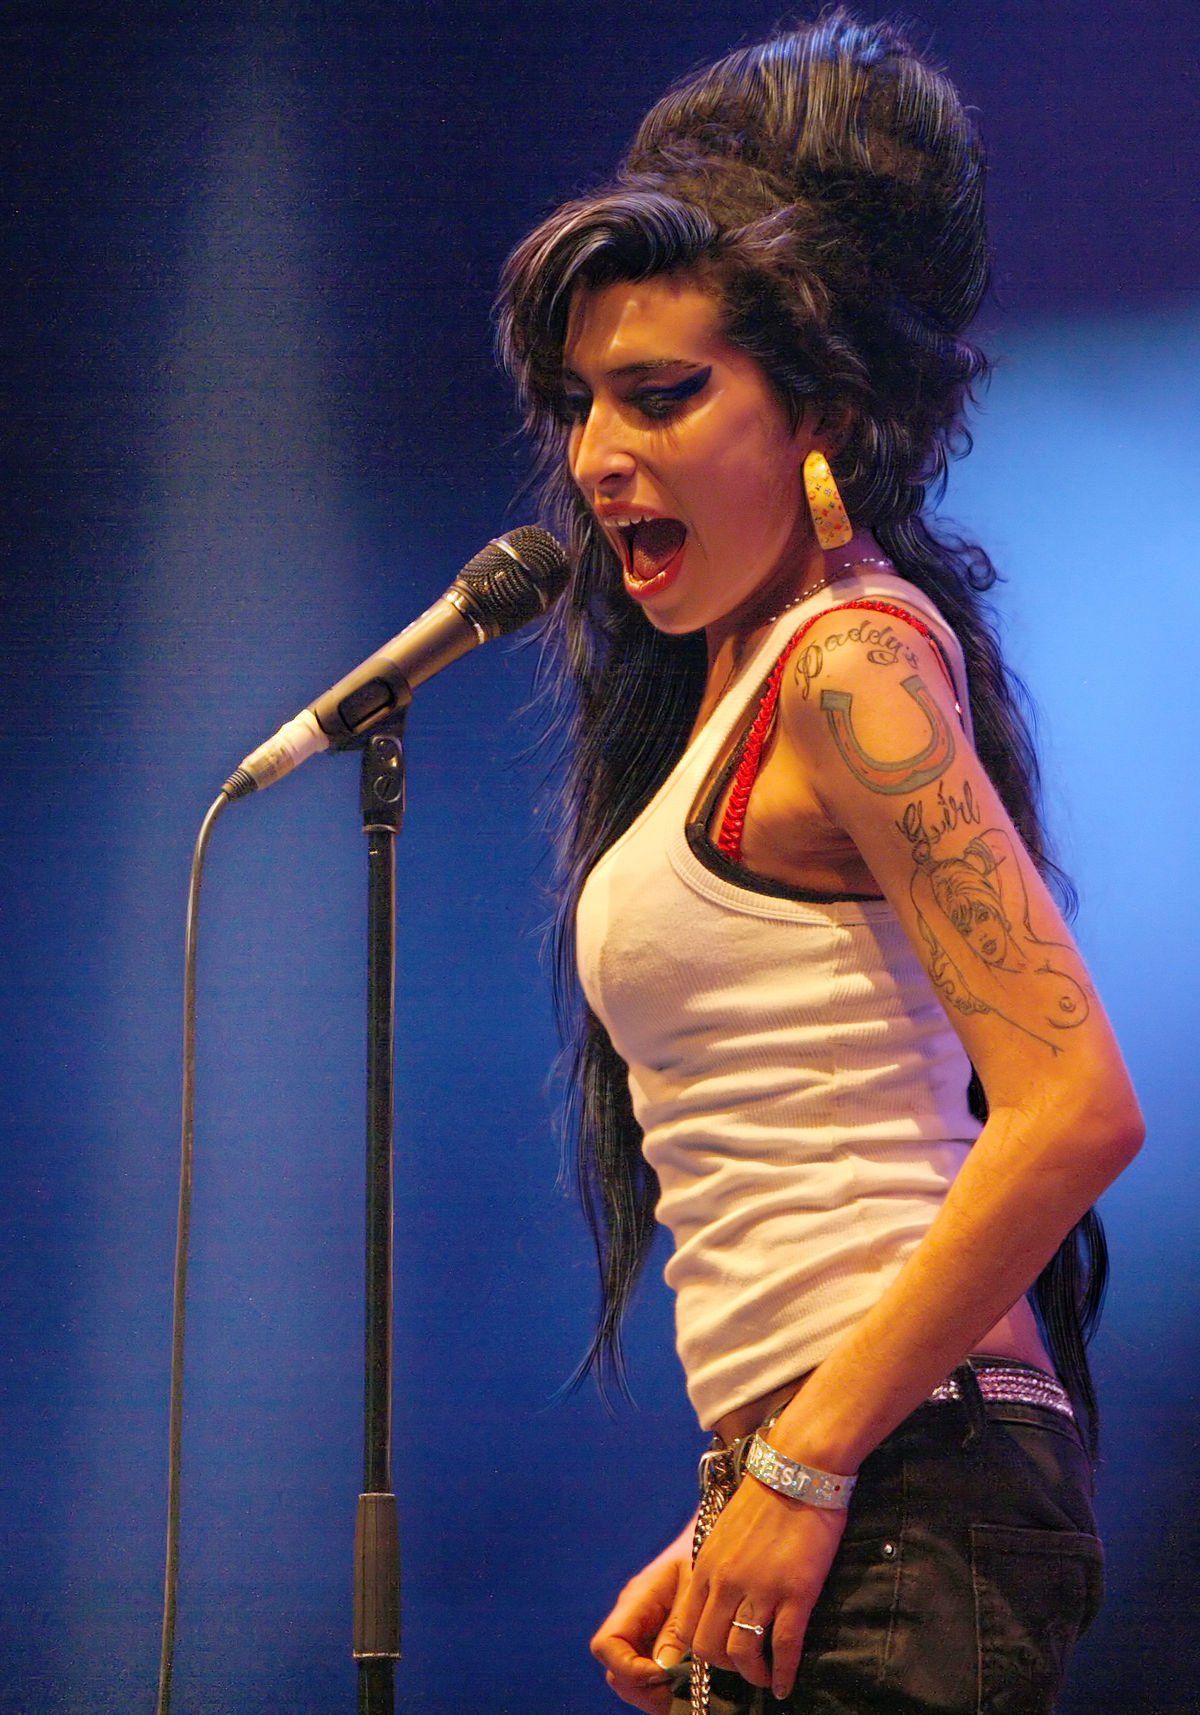 Amy Winehouse: Back to Black streaming online